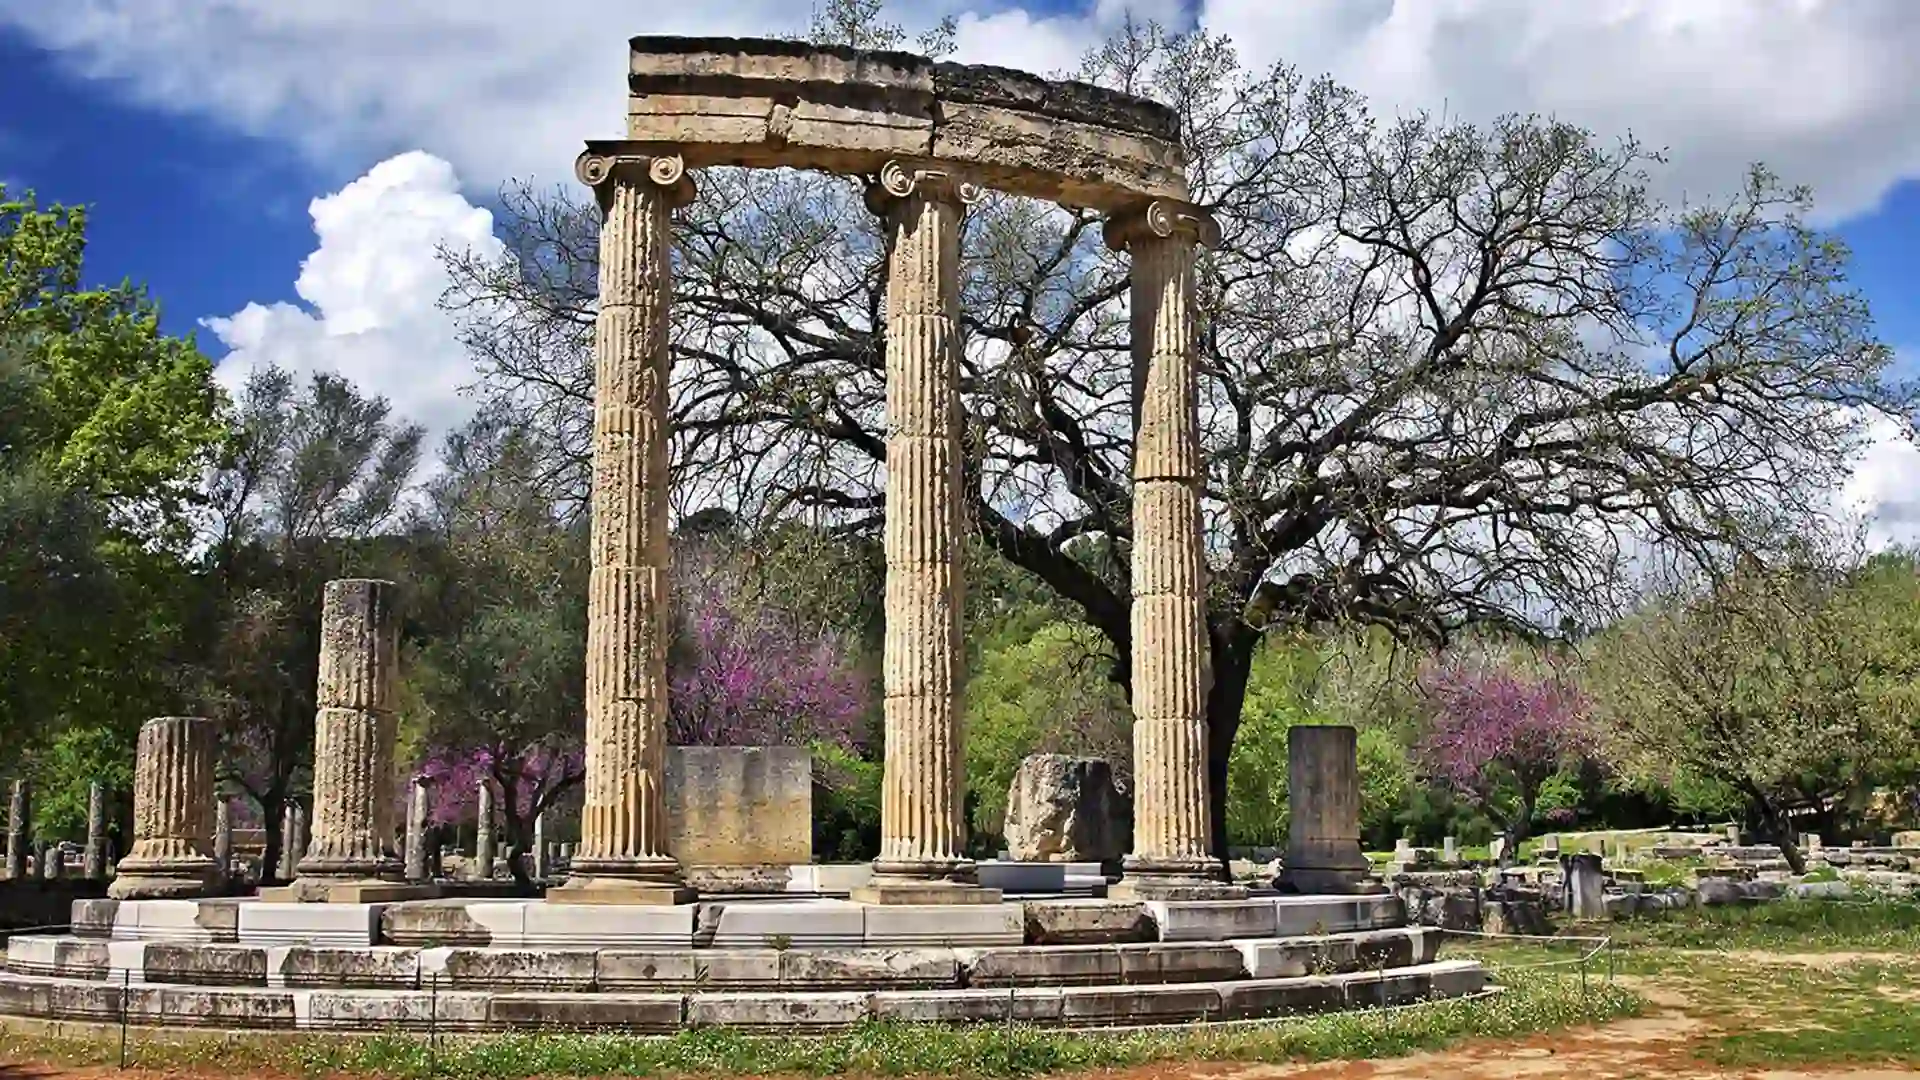 Large ancient pillars frame ruins on top of steps with trees in background.